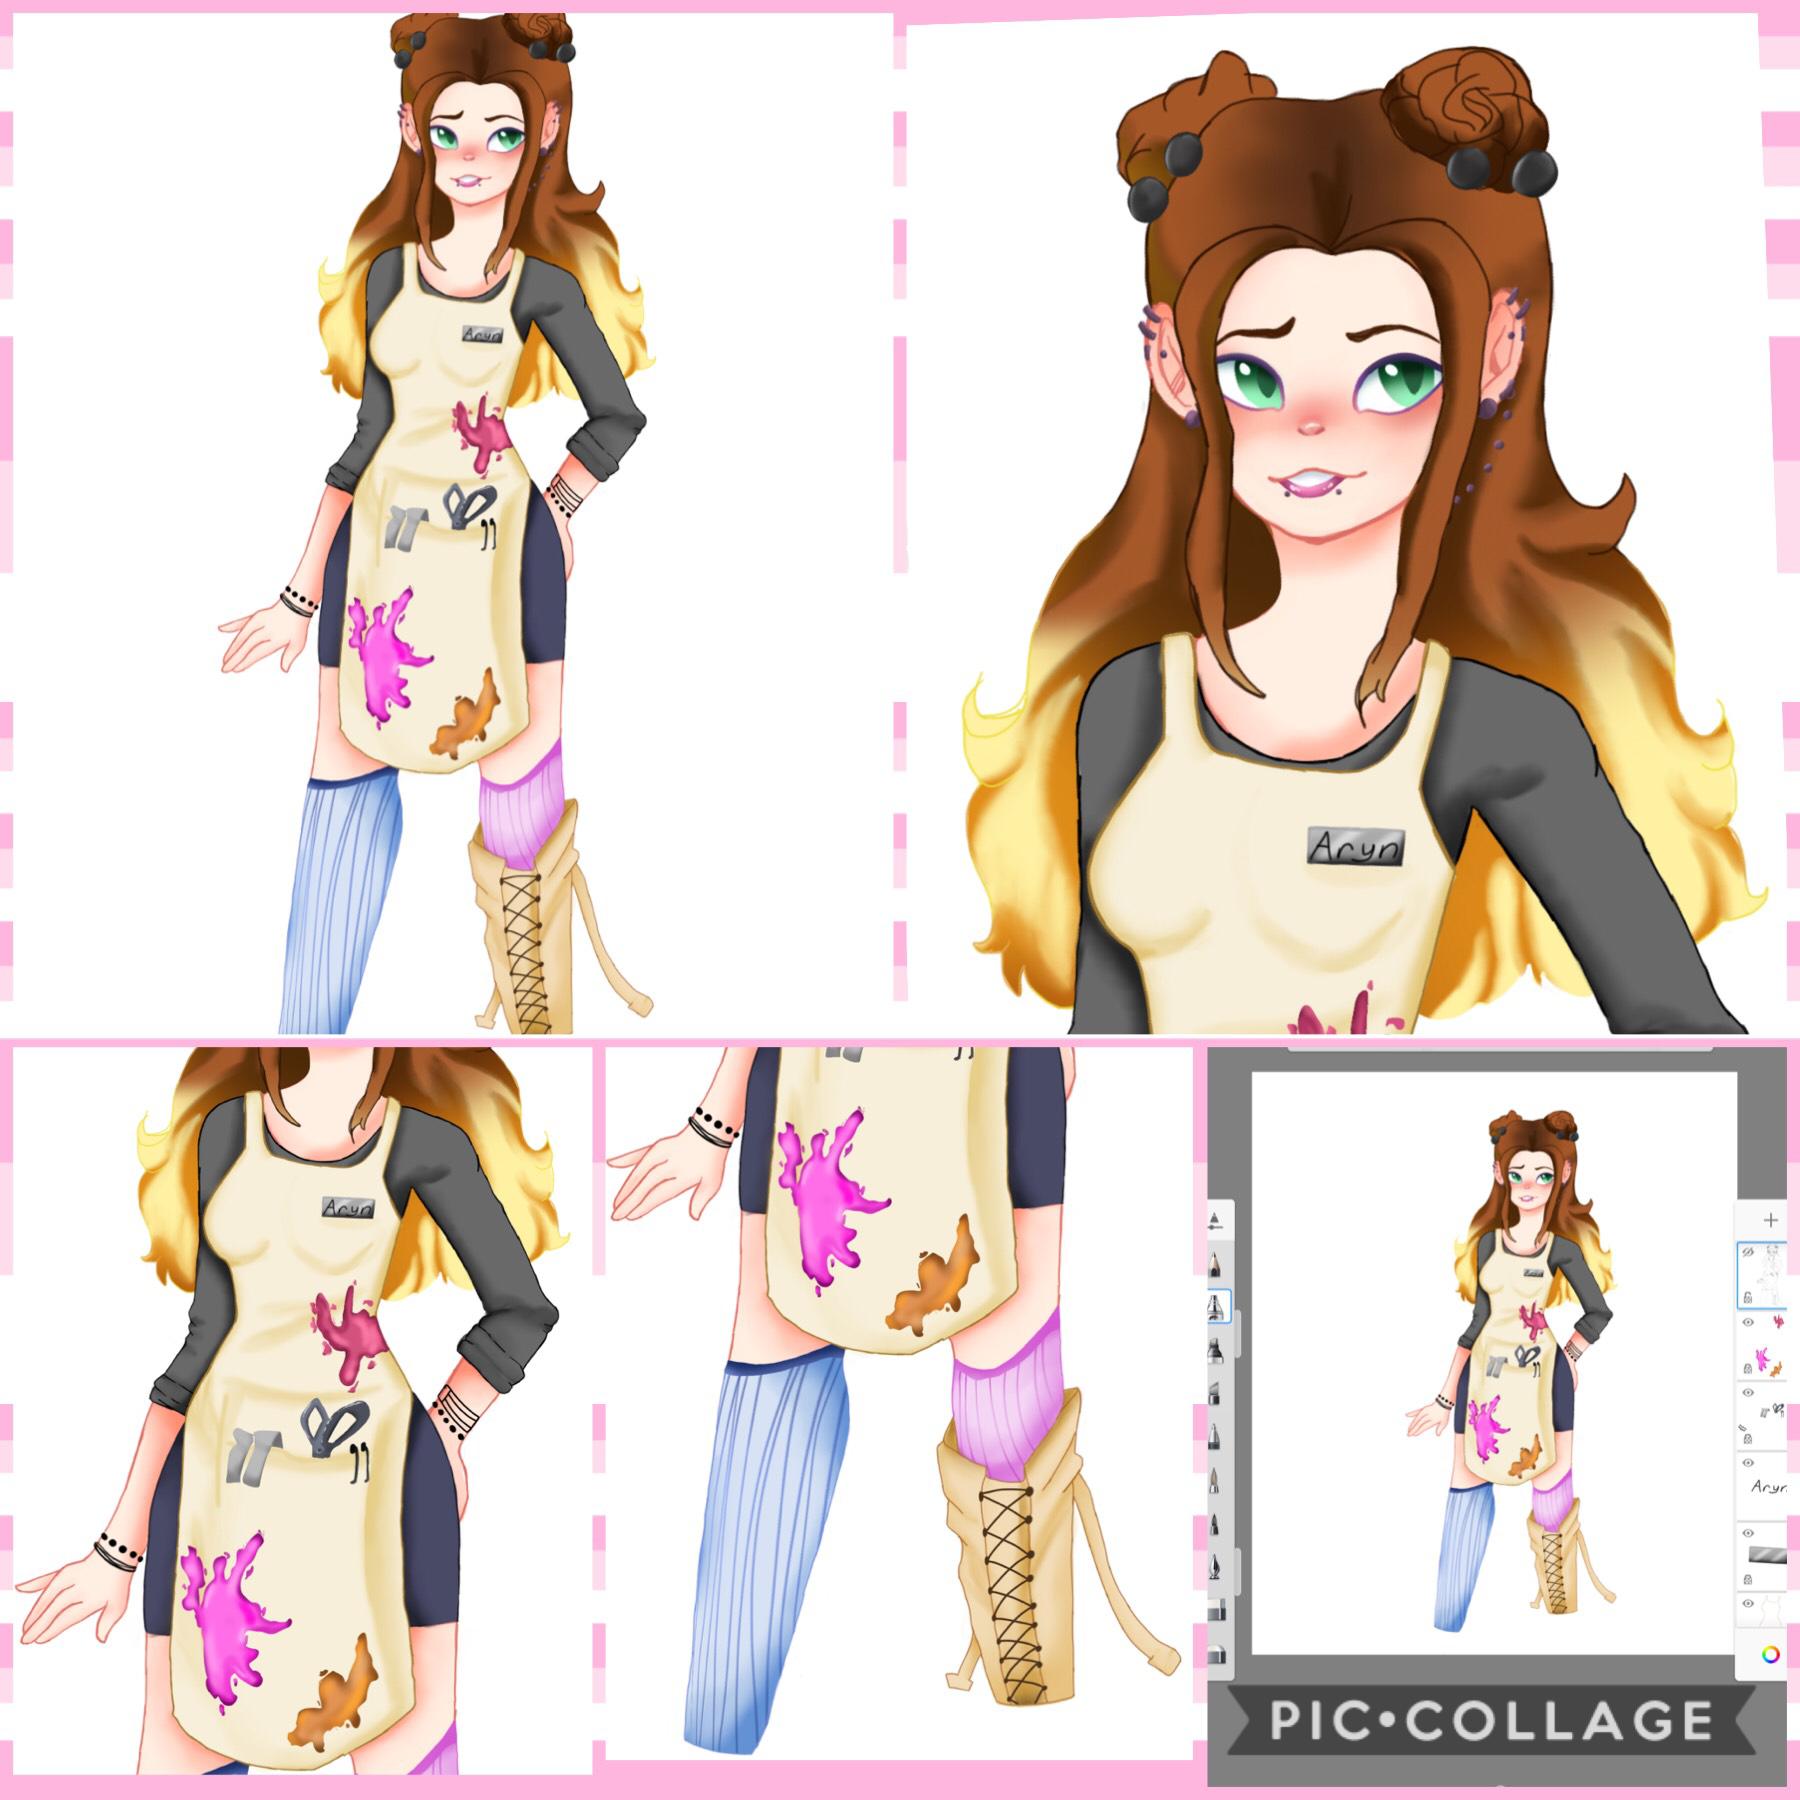 (TAP)
This is what I’ve been working on for over a week now lol, I made a Danganronpa OC!! Her name is Aryn, the Ultimate Hair-Stylist!! My friends wanted me to snore this to them but I wanted to finish, so sorry for the weight 😅